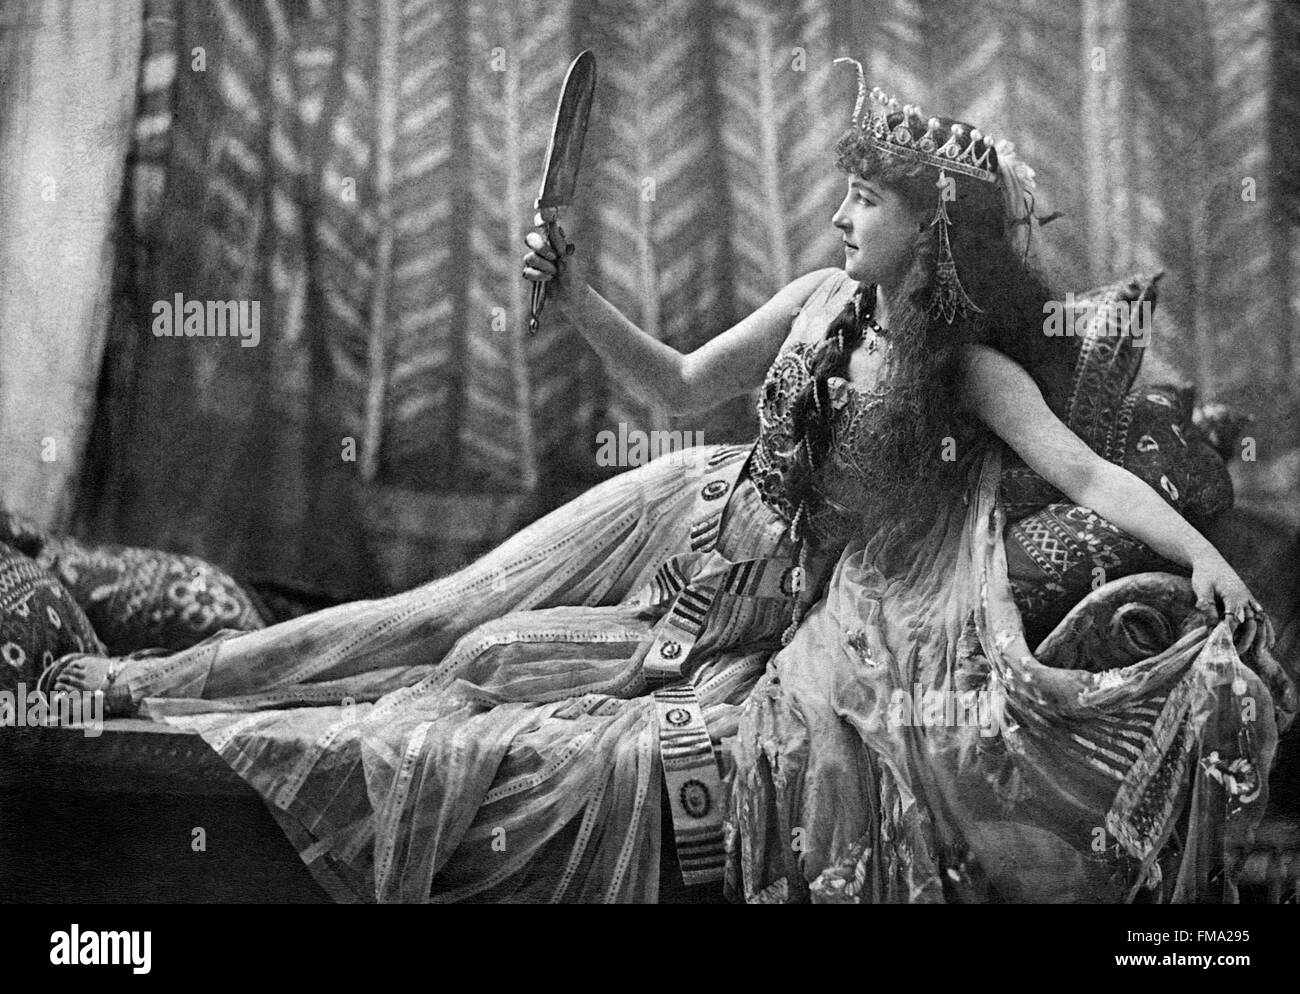 Lillie Langtry come Cleopatra, 1891. Foto Stock